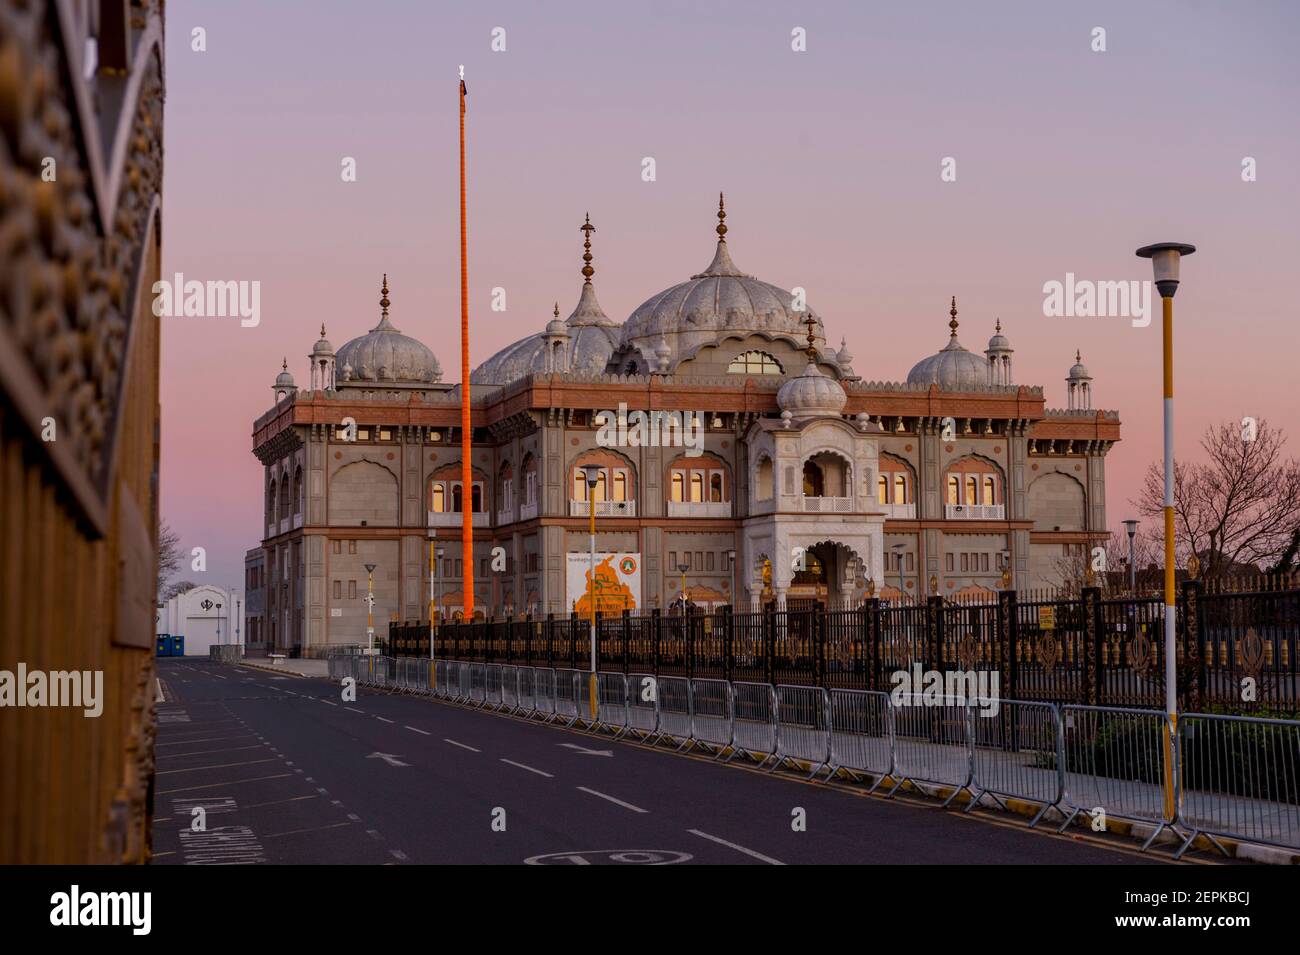 The Guru Nanak Darbar Gurdwara Sikh temple in gravesend at sunset. The marble building  is believed to be one of the largest in the UK; the Gurdwara c Stock Photo